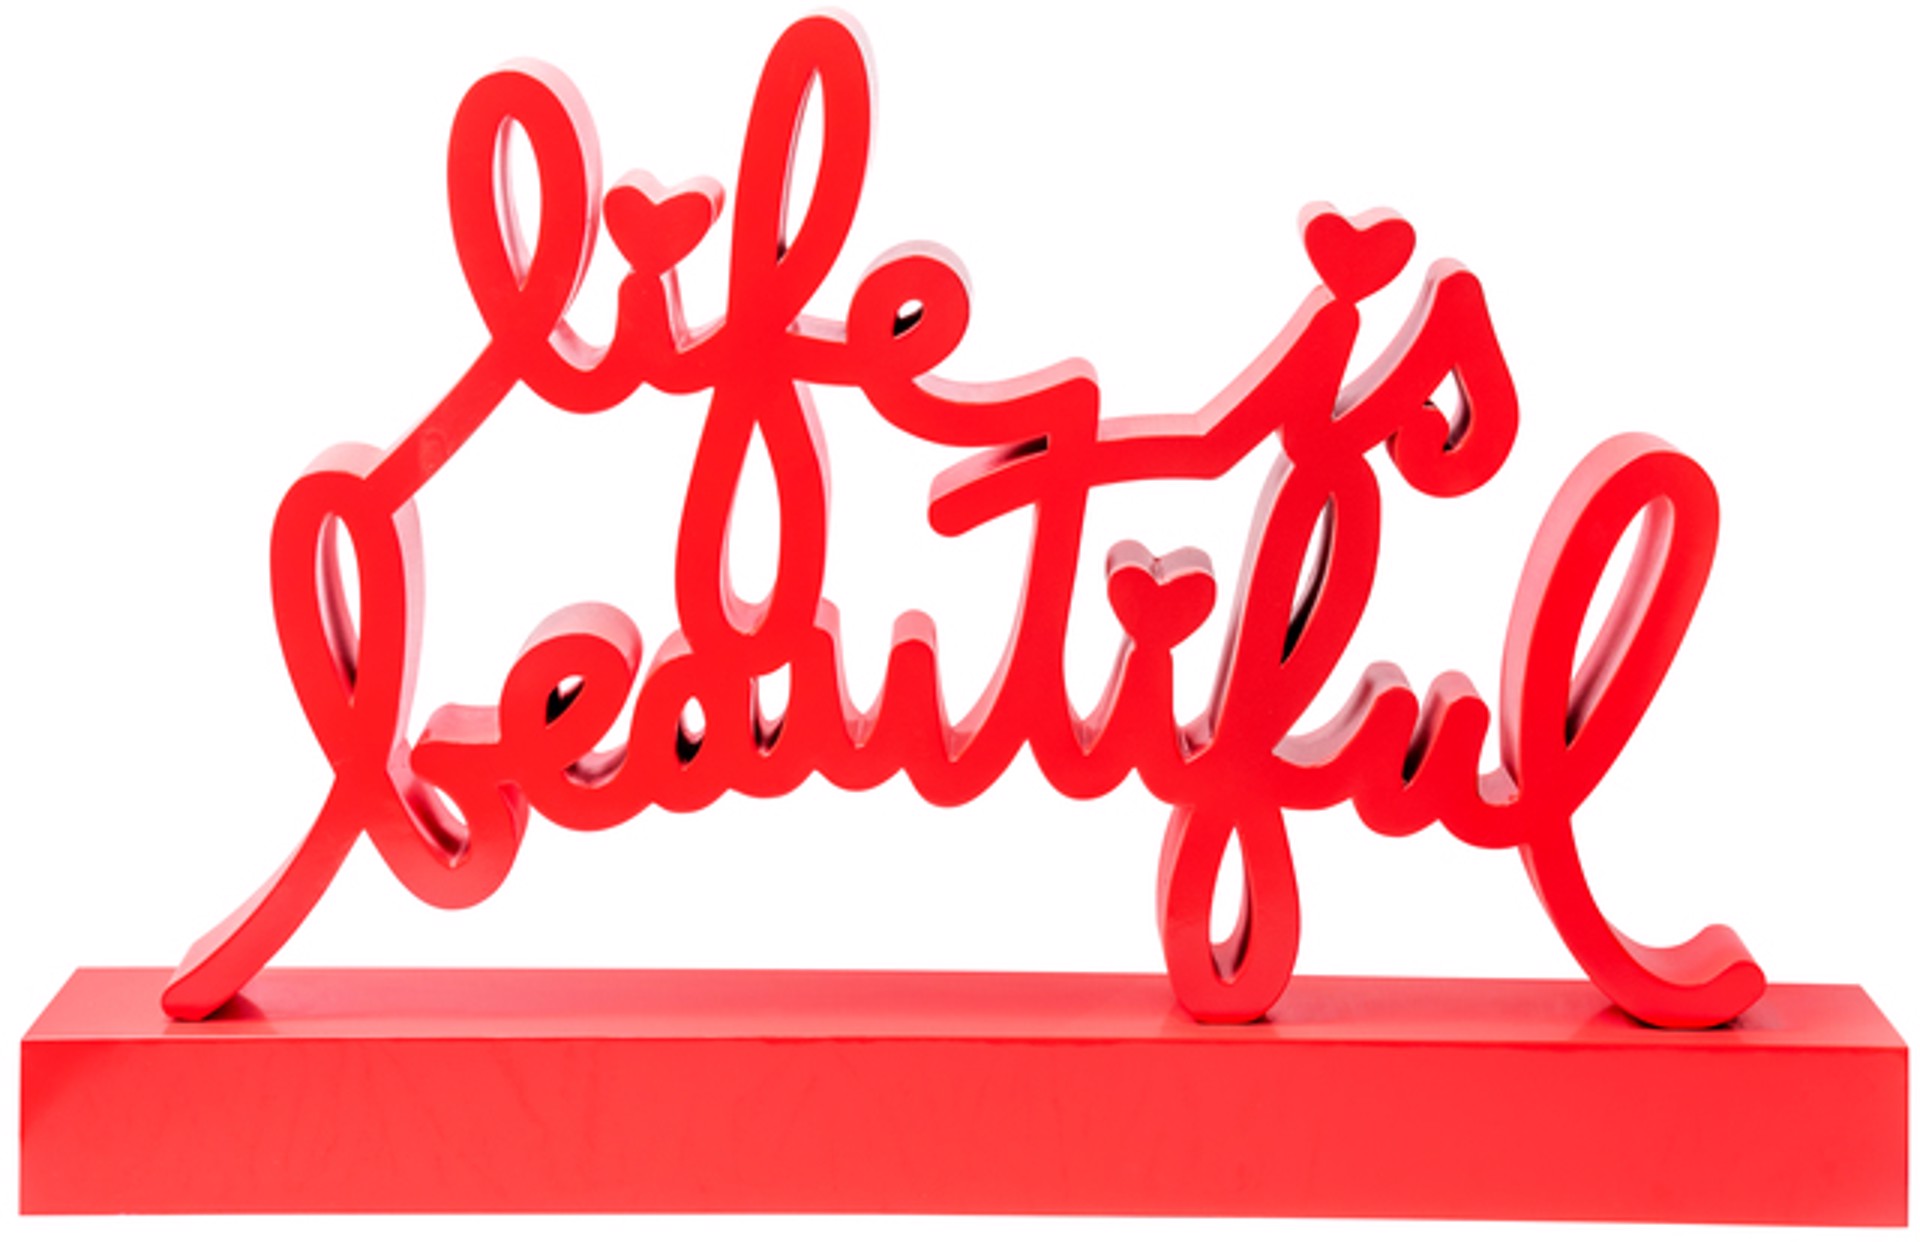 Life is Beautiful - Red by Mr. Brainwash